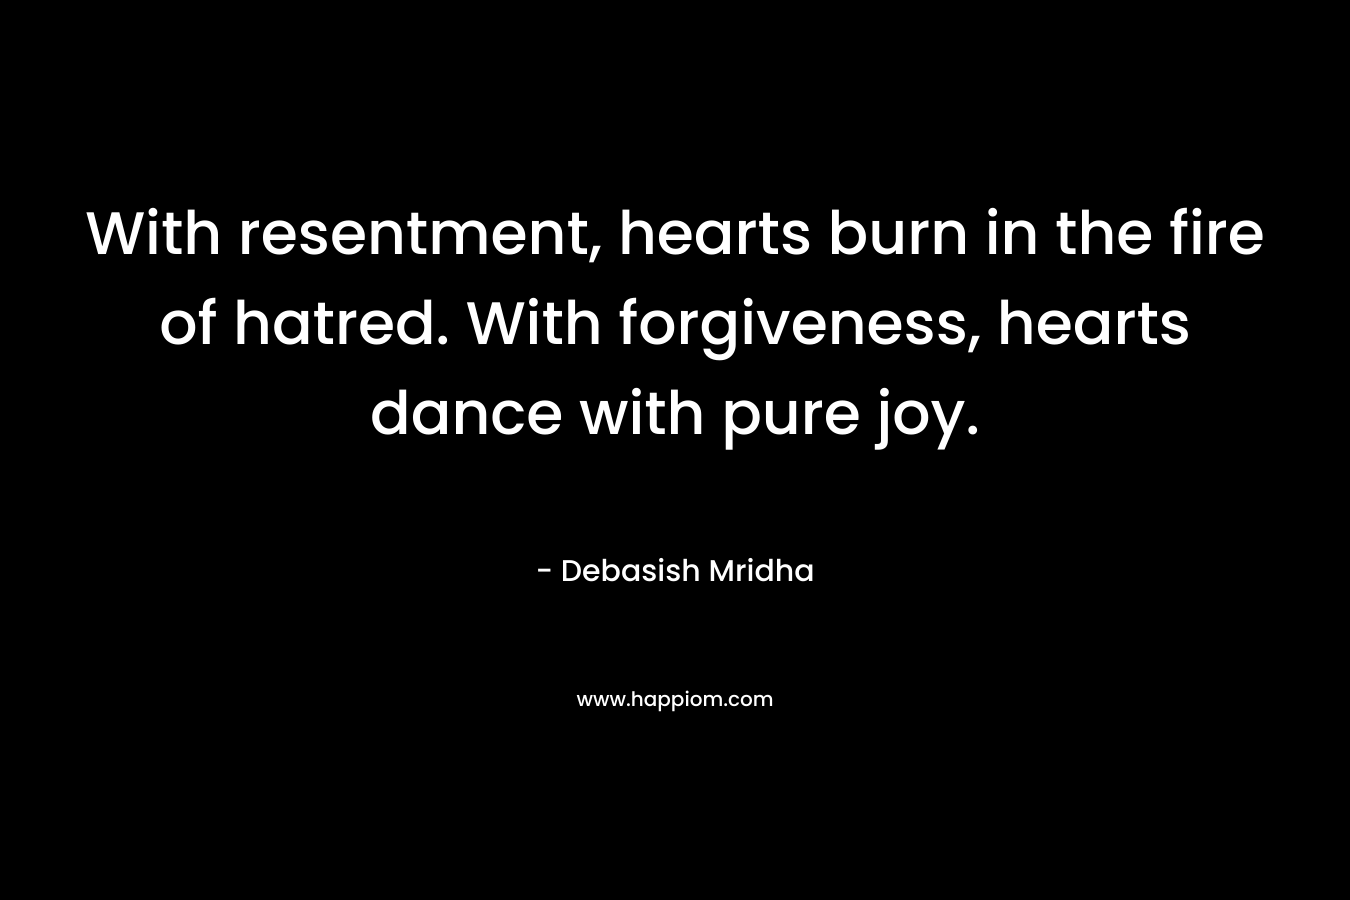 With resentment, hearts burn in the fire of hatred. With forgiveness, hearts dance with pure joy.